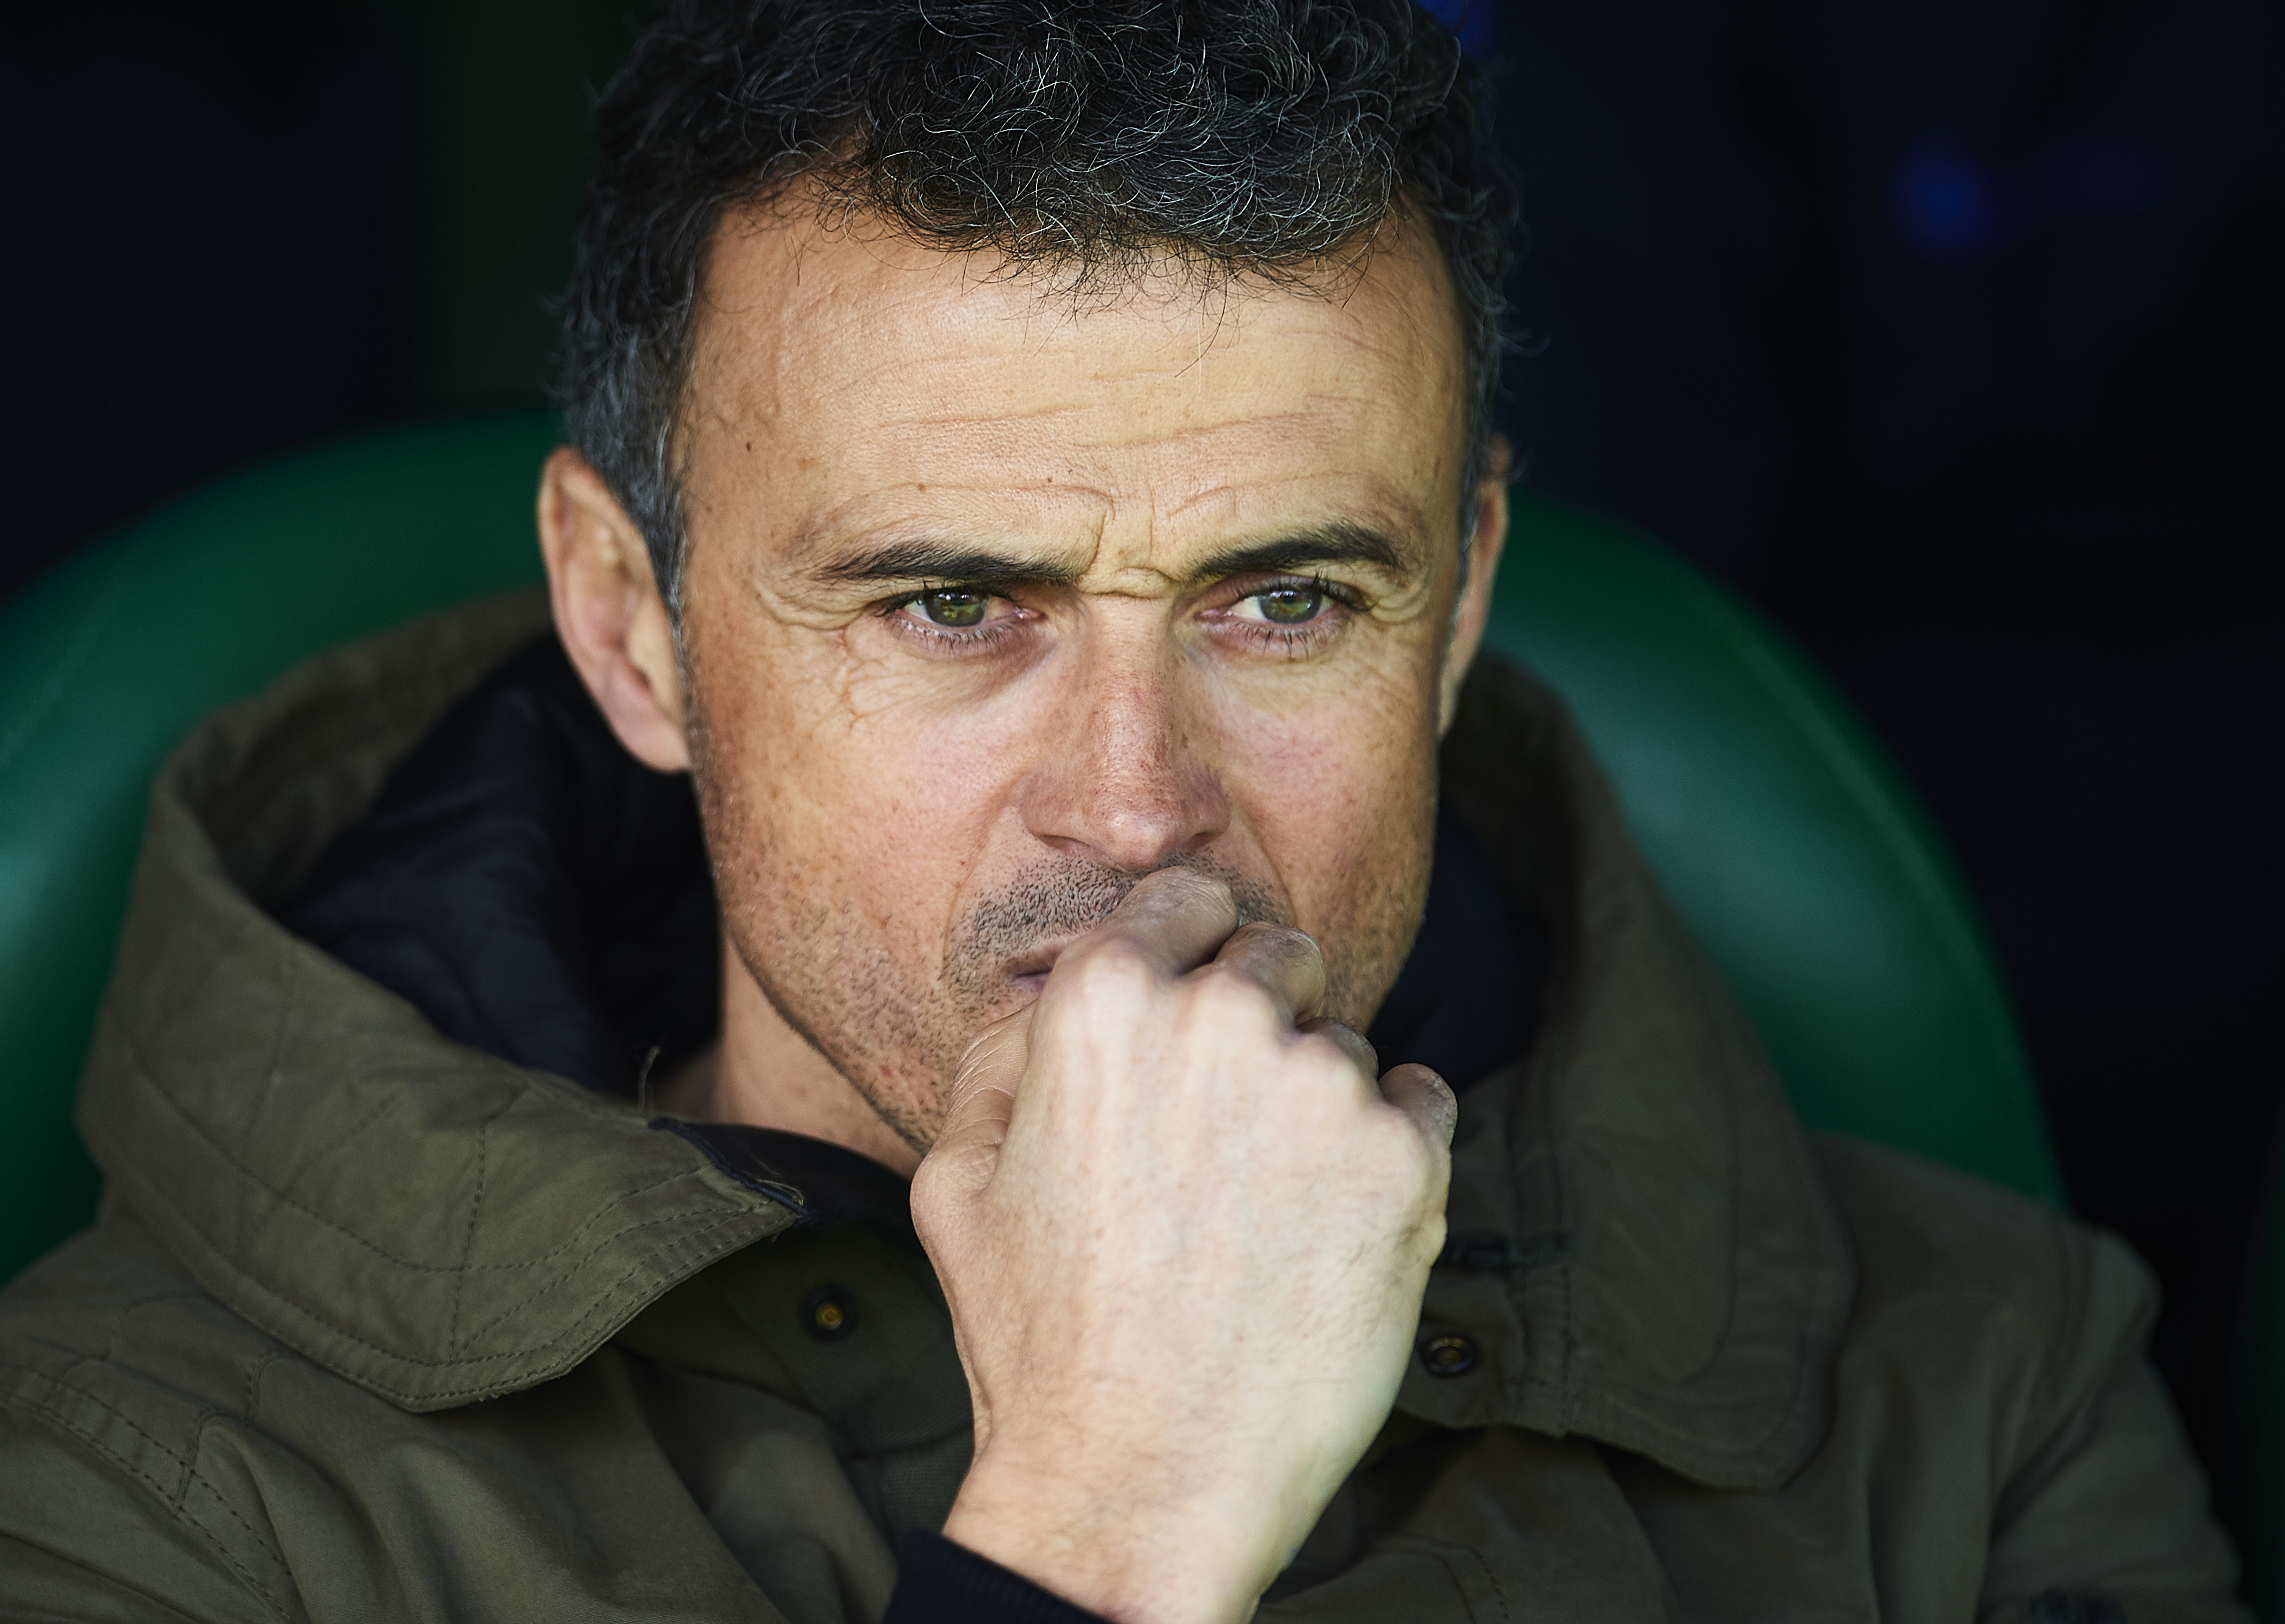 SEVILLE, SPAIN - JANUARY 29:  Head Coach of FC Barcelona Luis Enrique looks on prior to La Liga match between Real Betis Balompie and FC Barcelona at Benito Villamarin Stadium on January 29, 2017 in Seville, Spain.  (Photo by Aitor Alcalde/Getty Images)